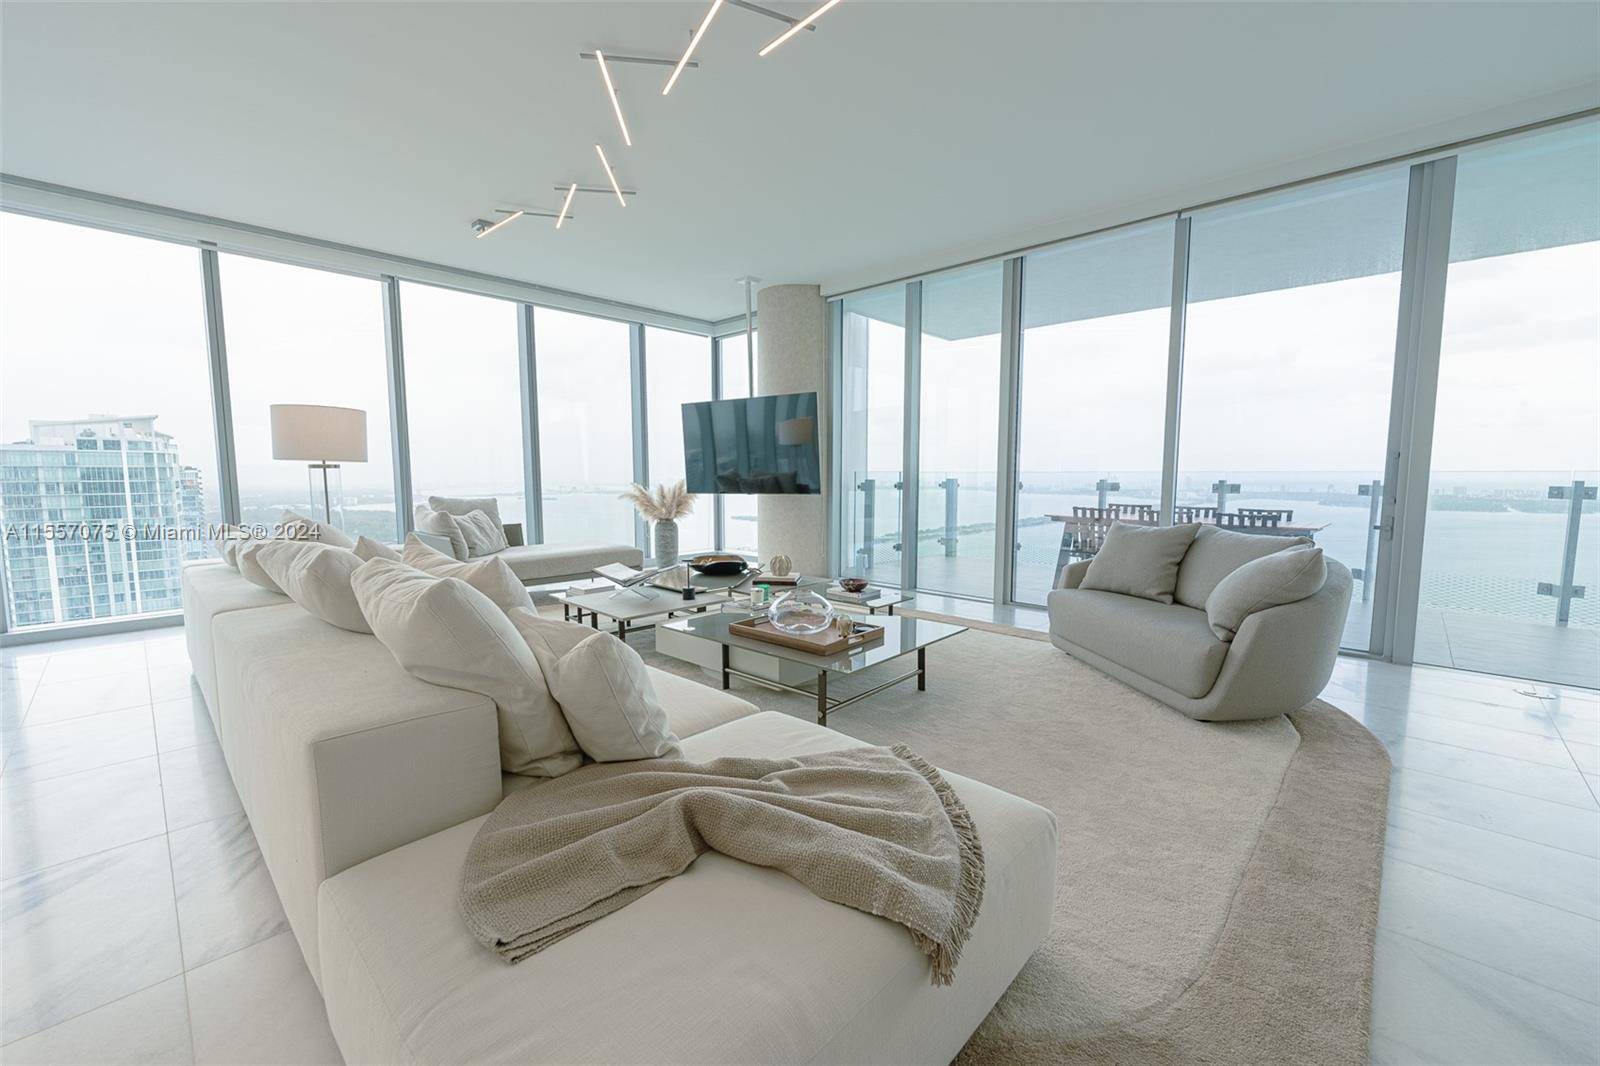 Completely furnished by Artefacto and professionally decorated 4 bedroom apartment at Missoni Baia condominium.